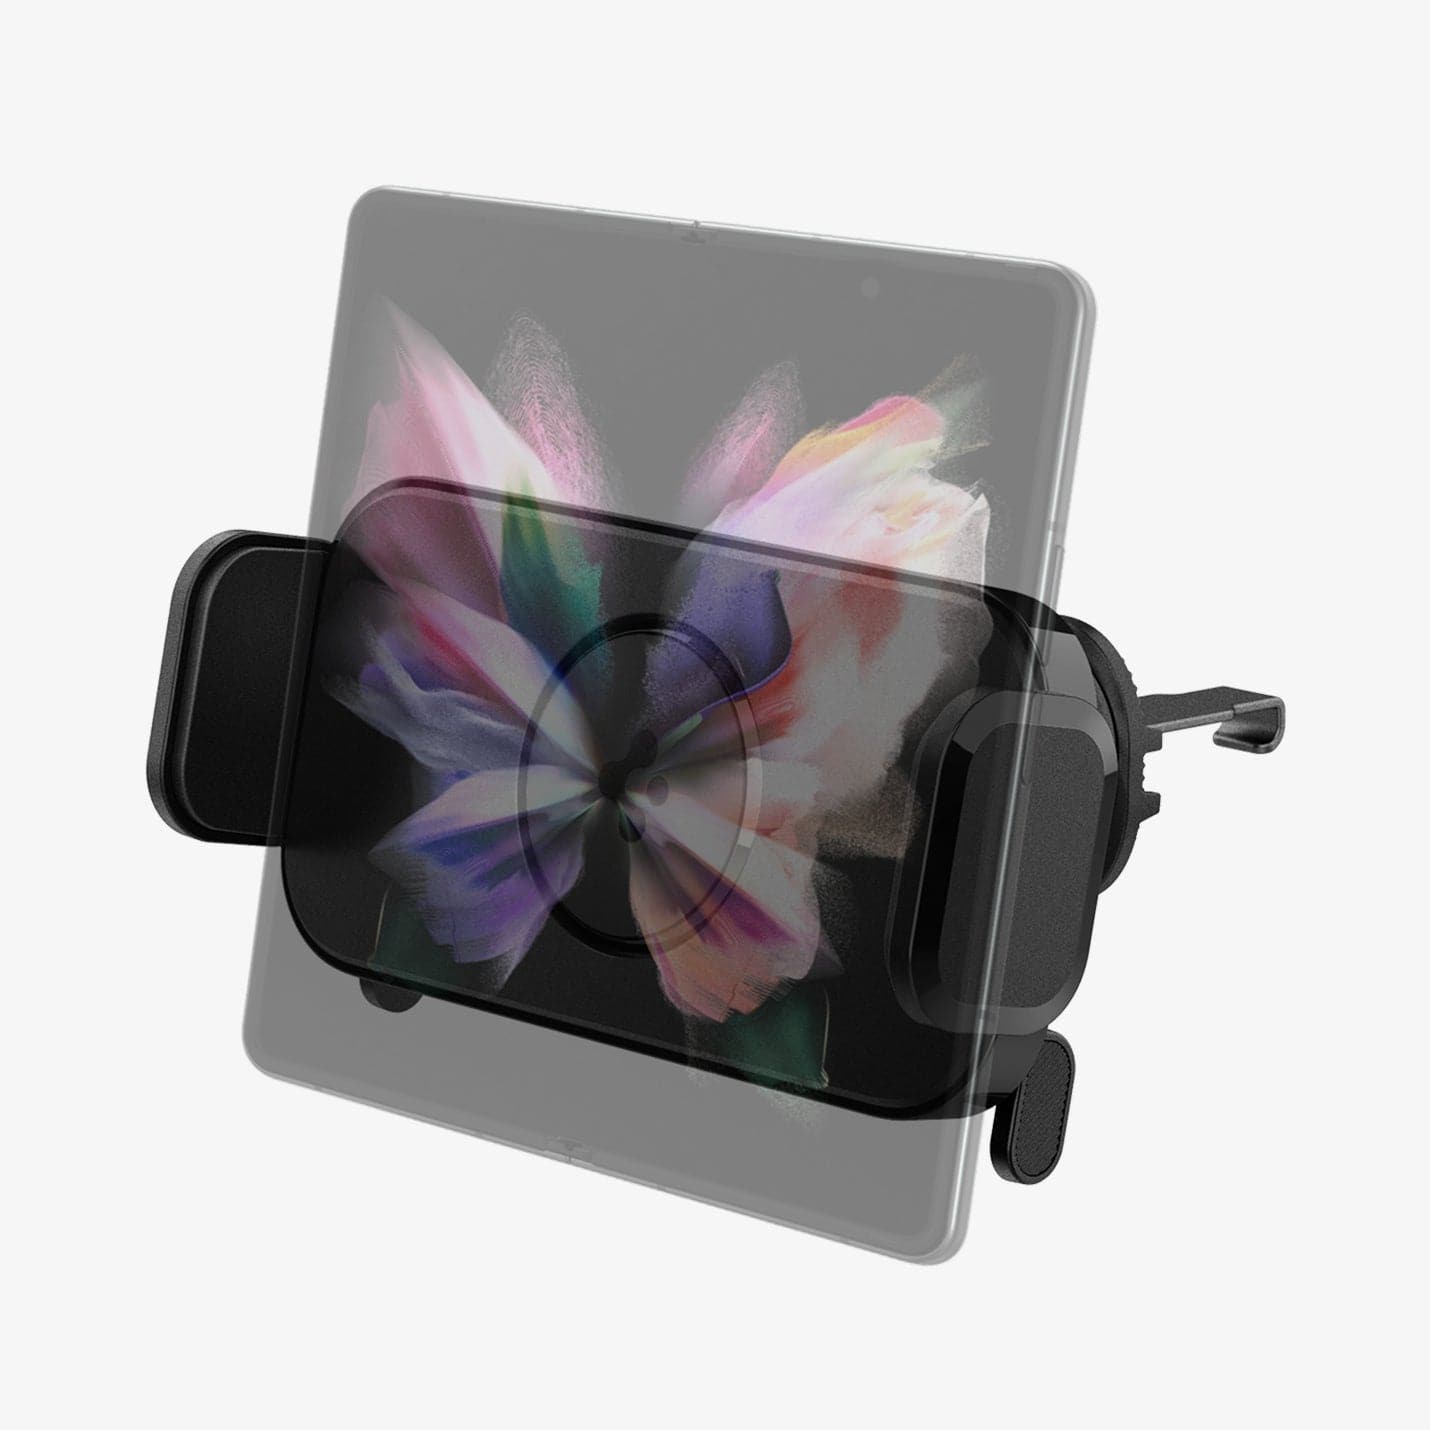 ACP04278 - GTS12 Galaxy Fold Car Mount in black showing the front with a see through mosaic of galaxy fold